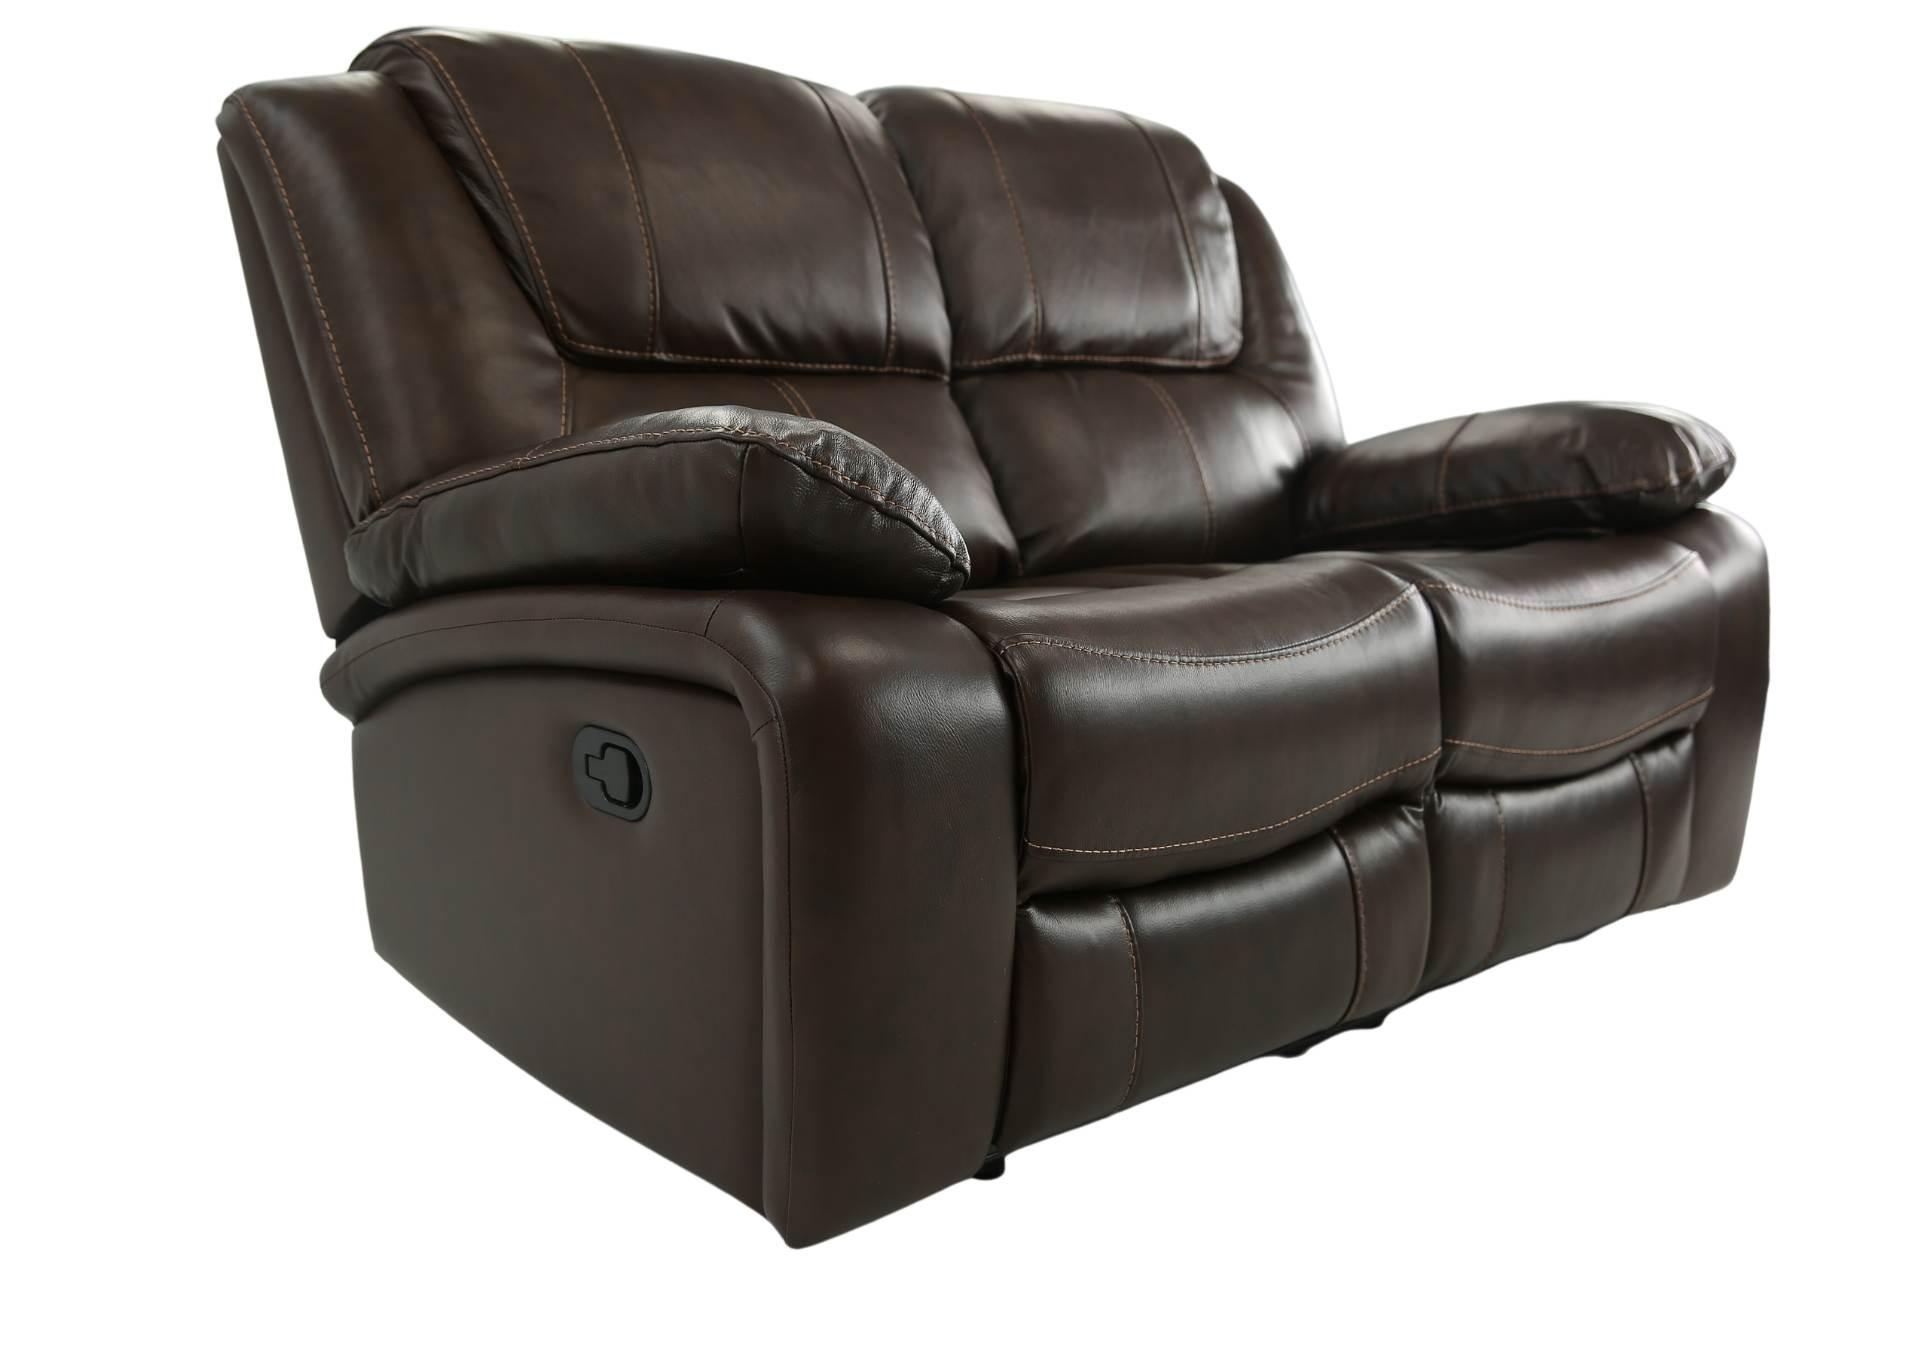 EASTON TOBACCO LEATHER RECLINING LOVESEAT,CHEERS